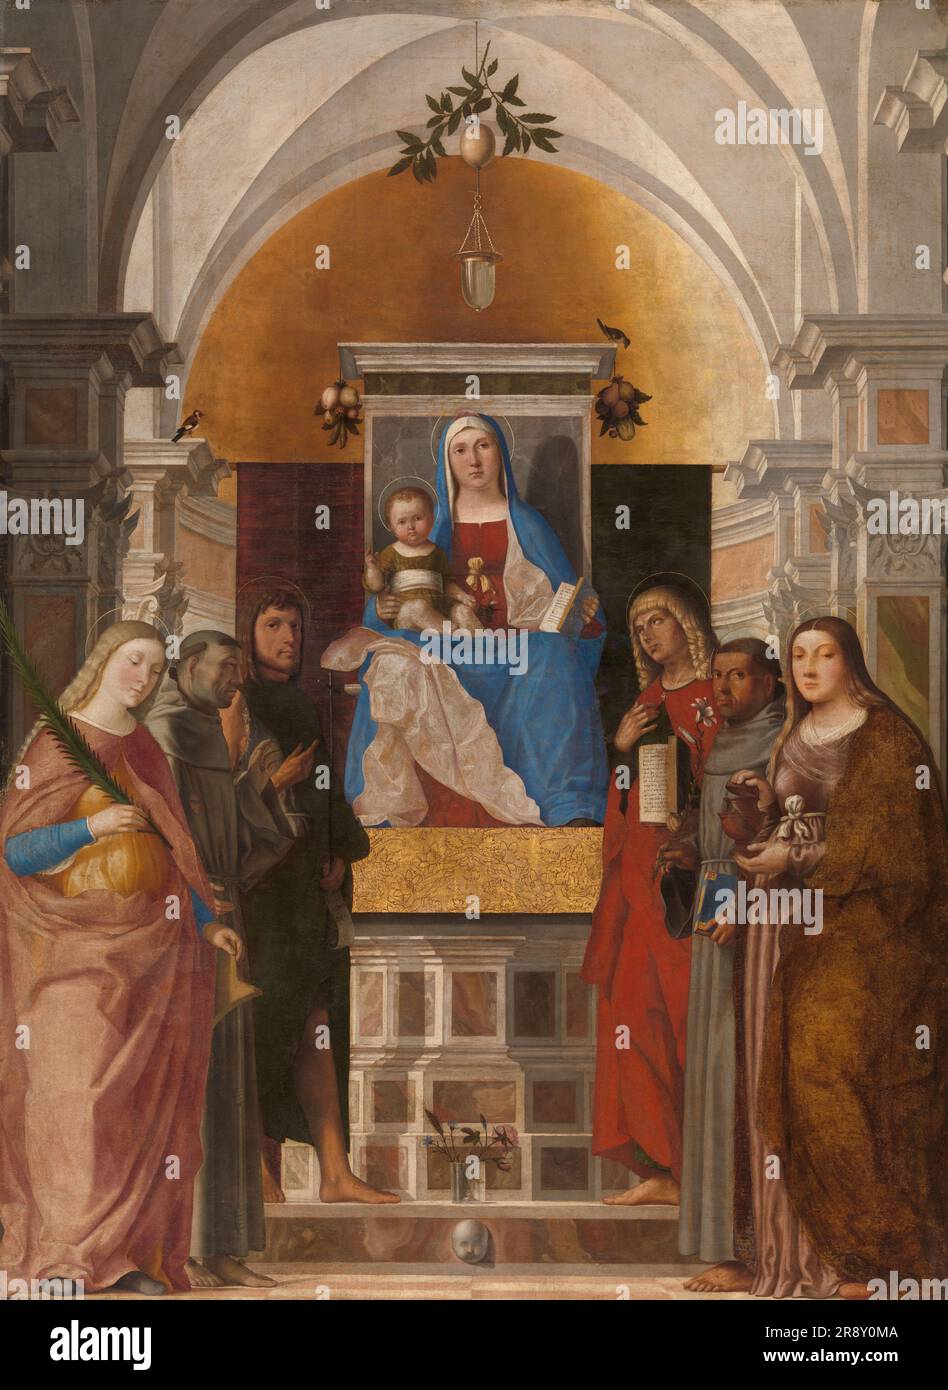 Madonna and Child with Sts Catherine, Francis of Assisi, John the Baptist, John the Evangelist, Antony of Padua and Mary Magdalene, 1510-1520. Stock Photo